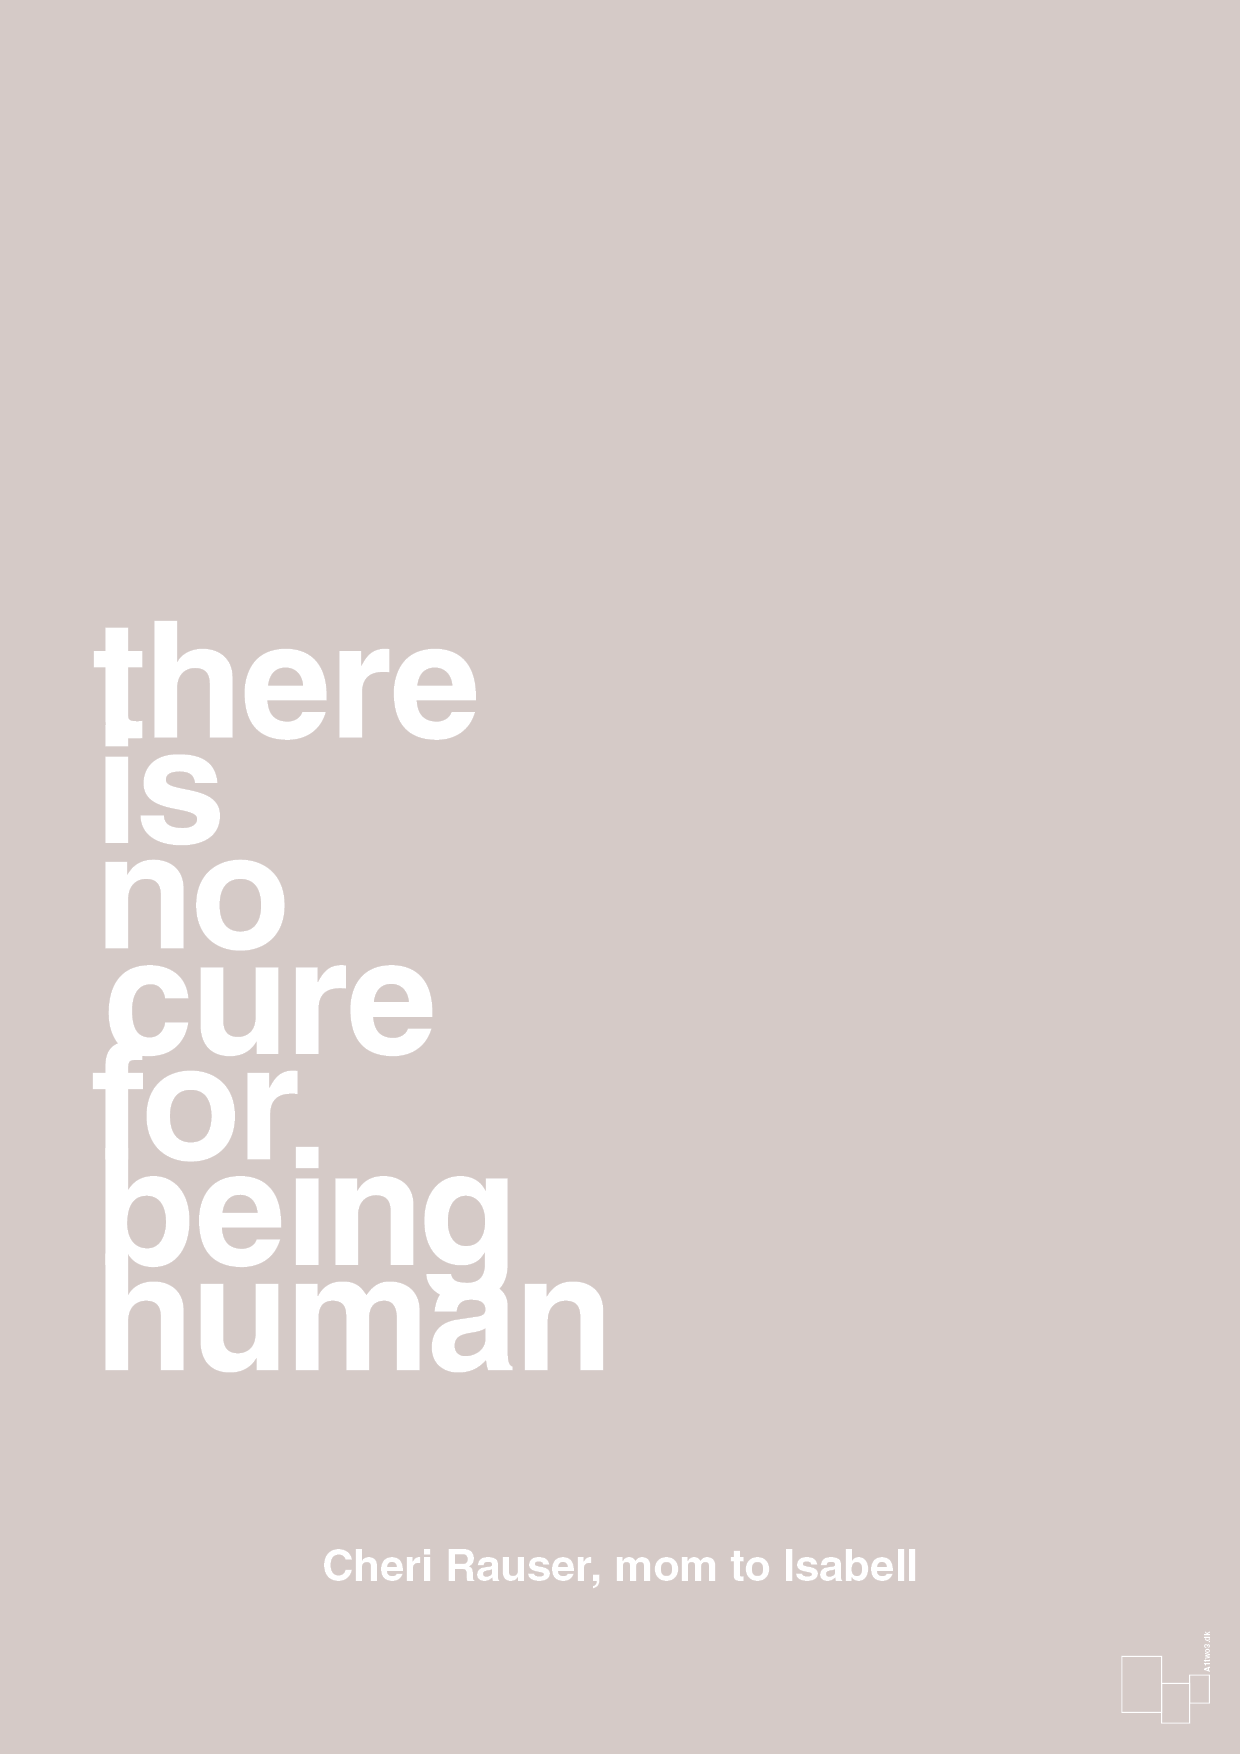 there is no cure for being human - Plakat med Samfund i Broken Beige